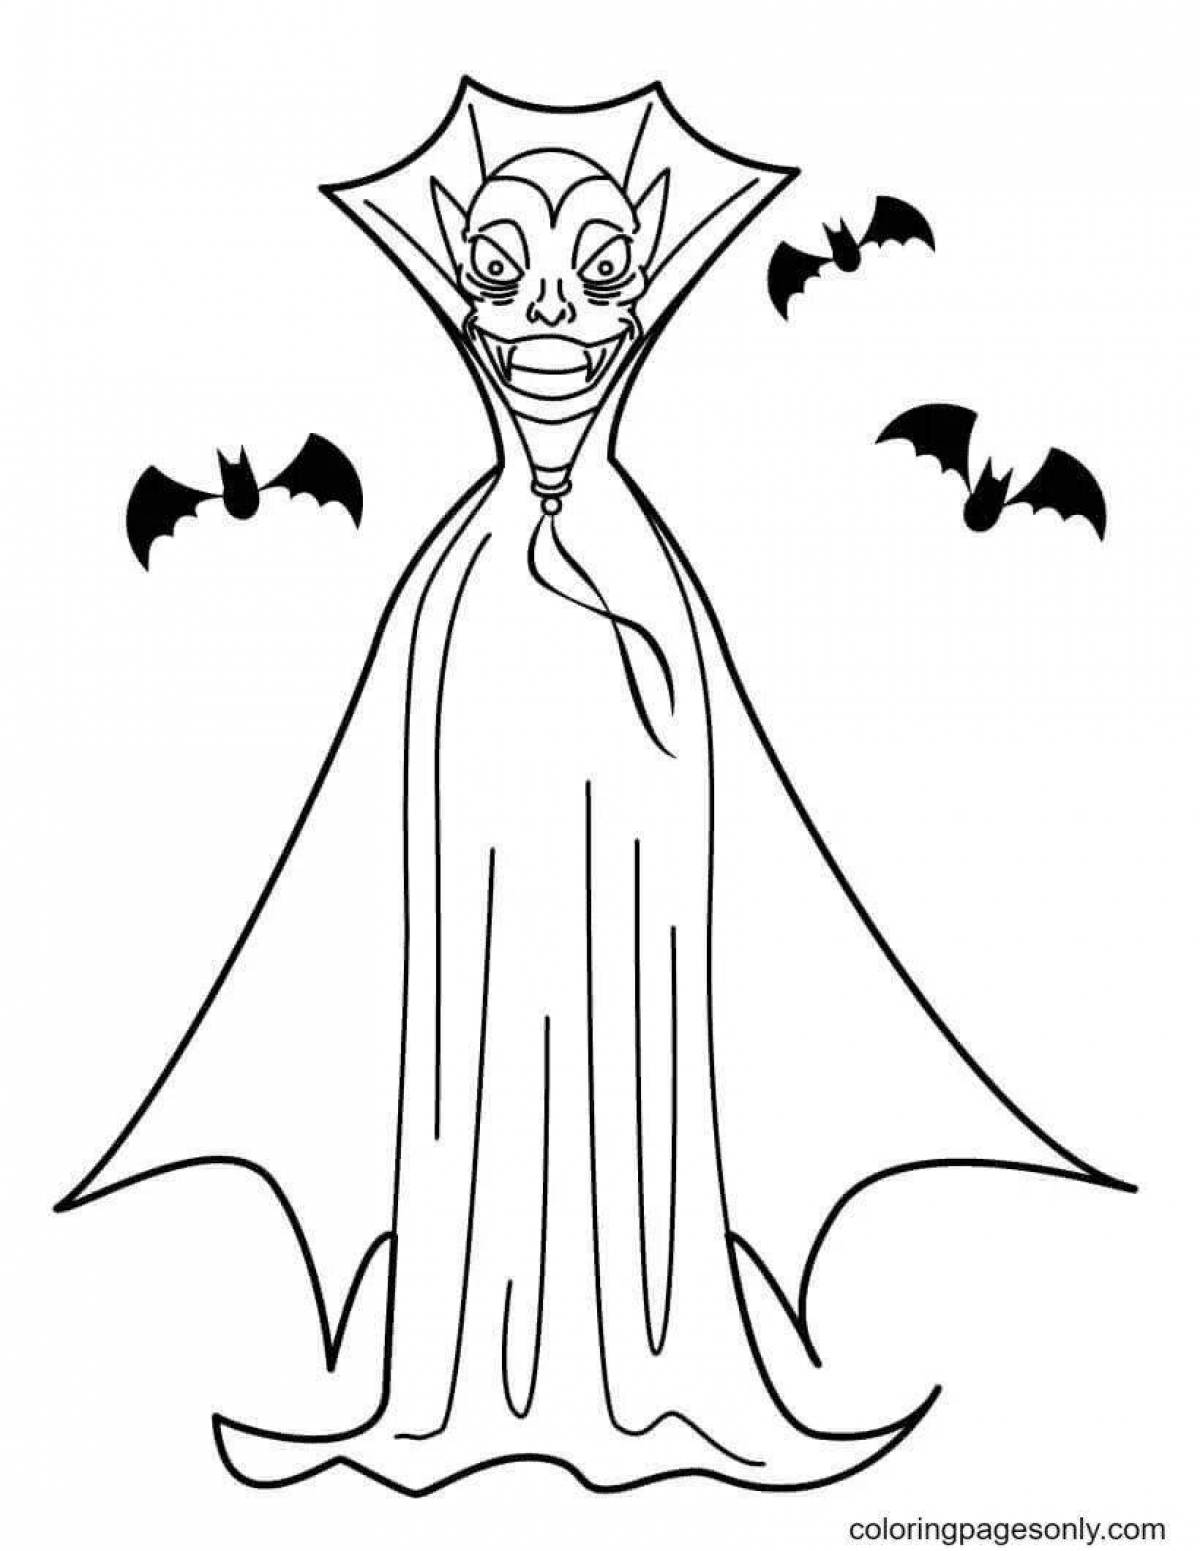 Shocking vampire coloring page for kids